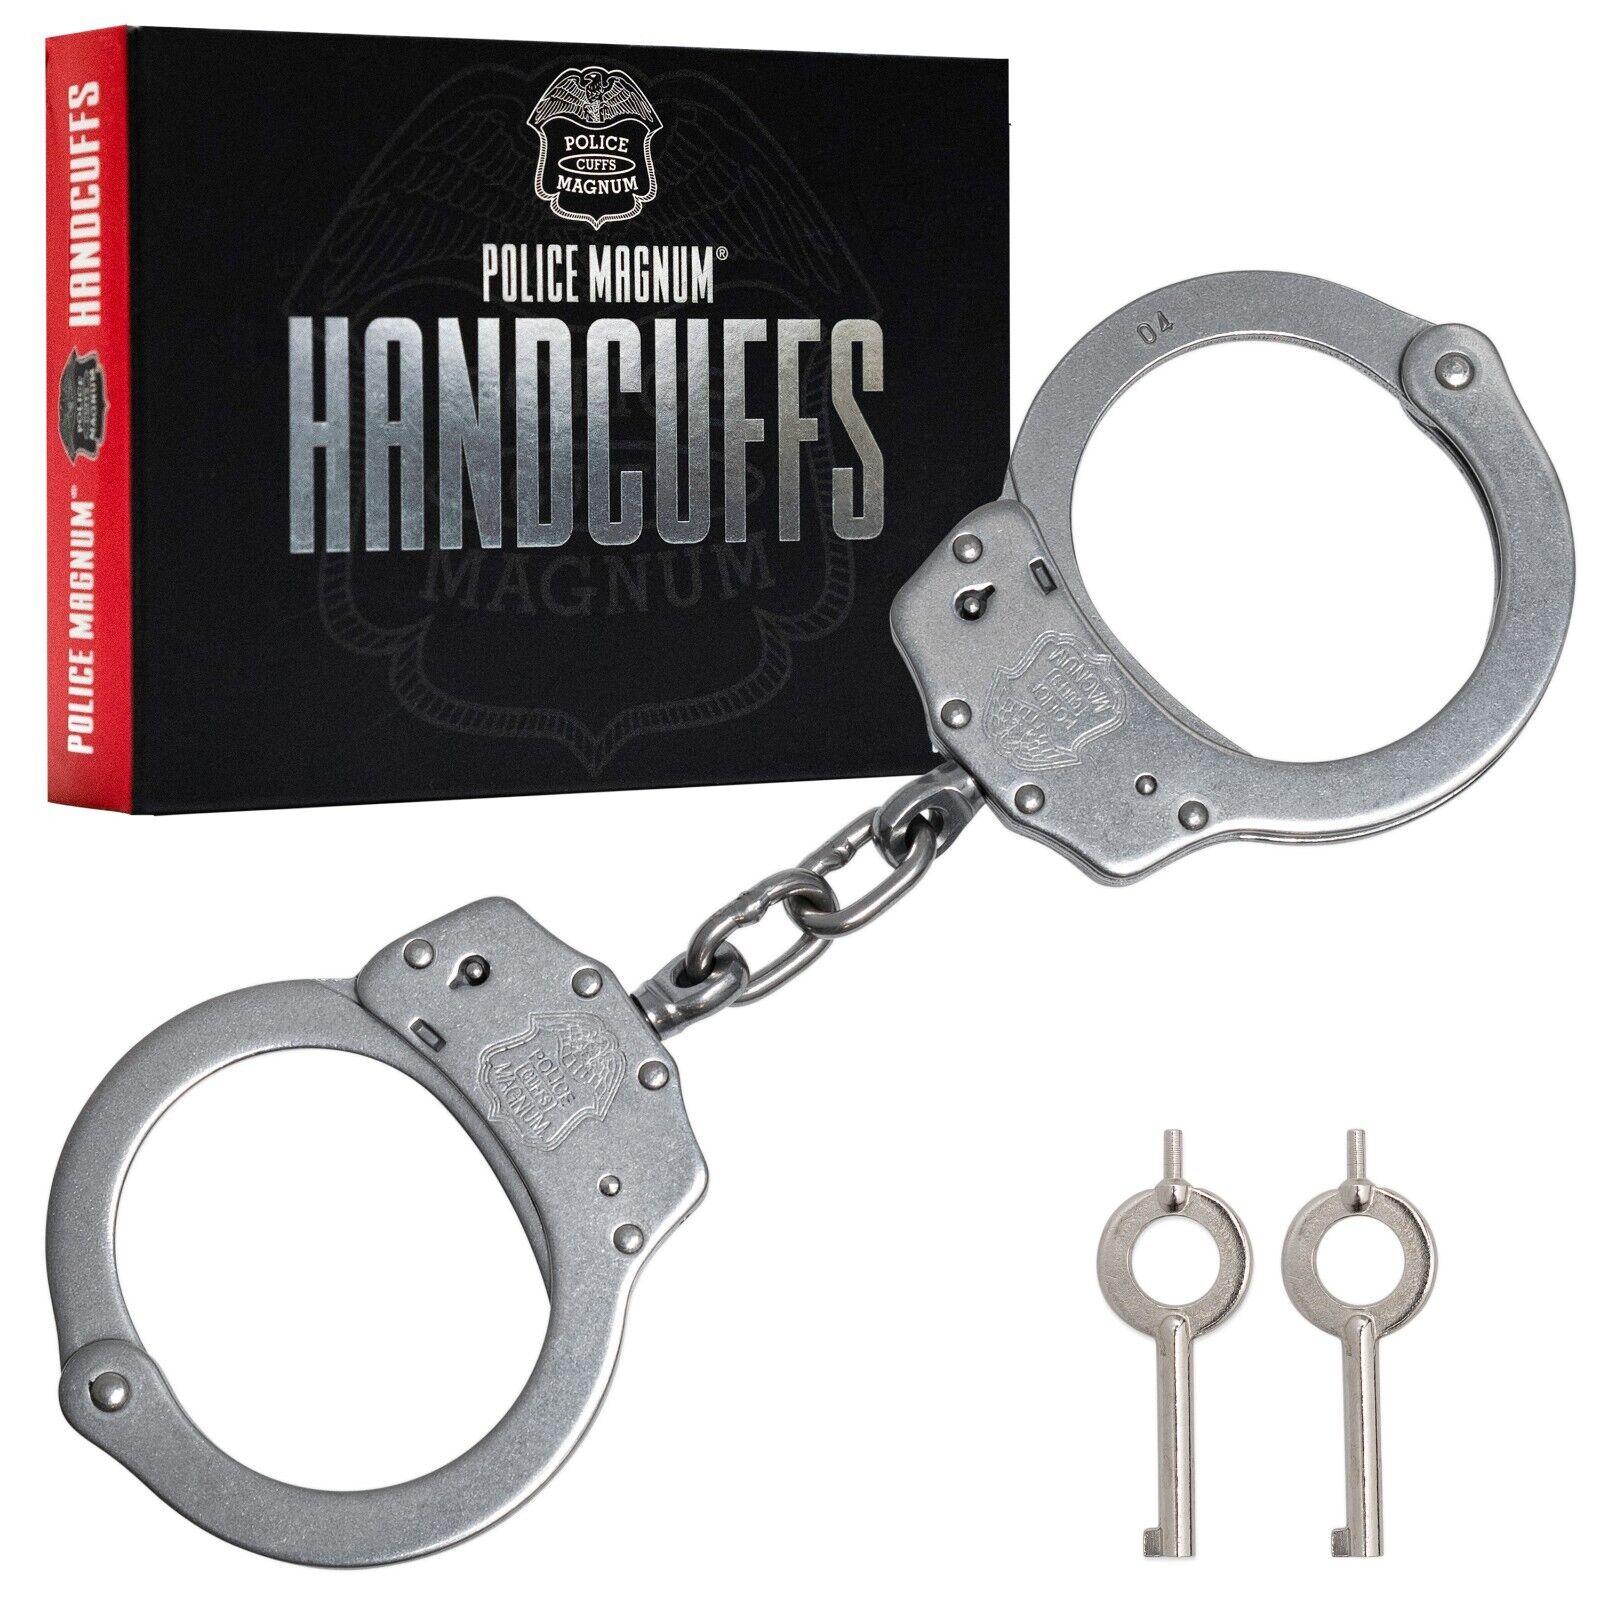 Police Magnum Stainless Steel Heavy Duty Handcuffs-Law enforcement security gear